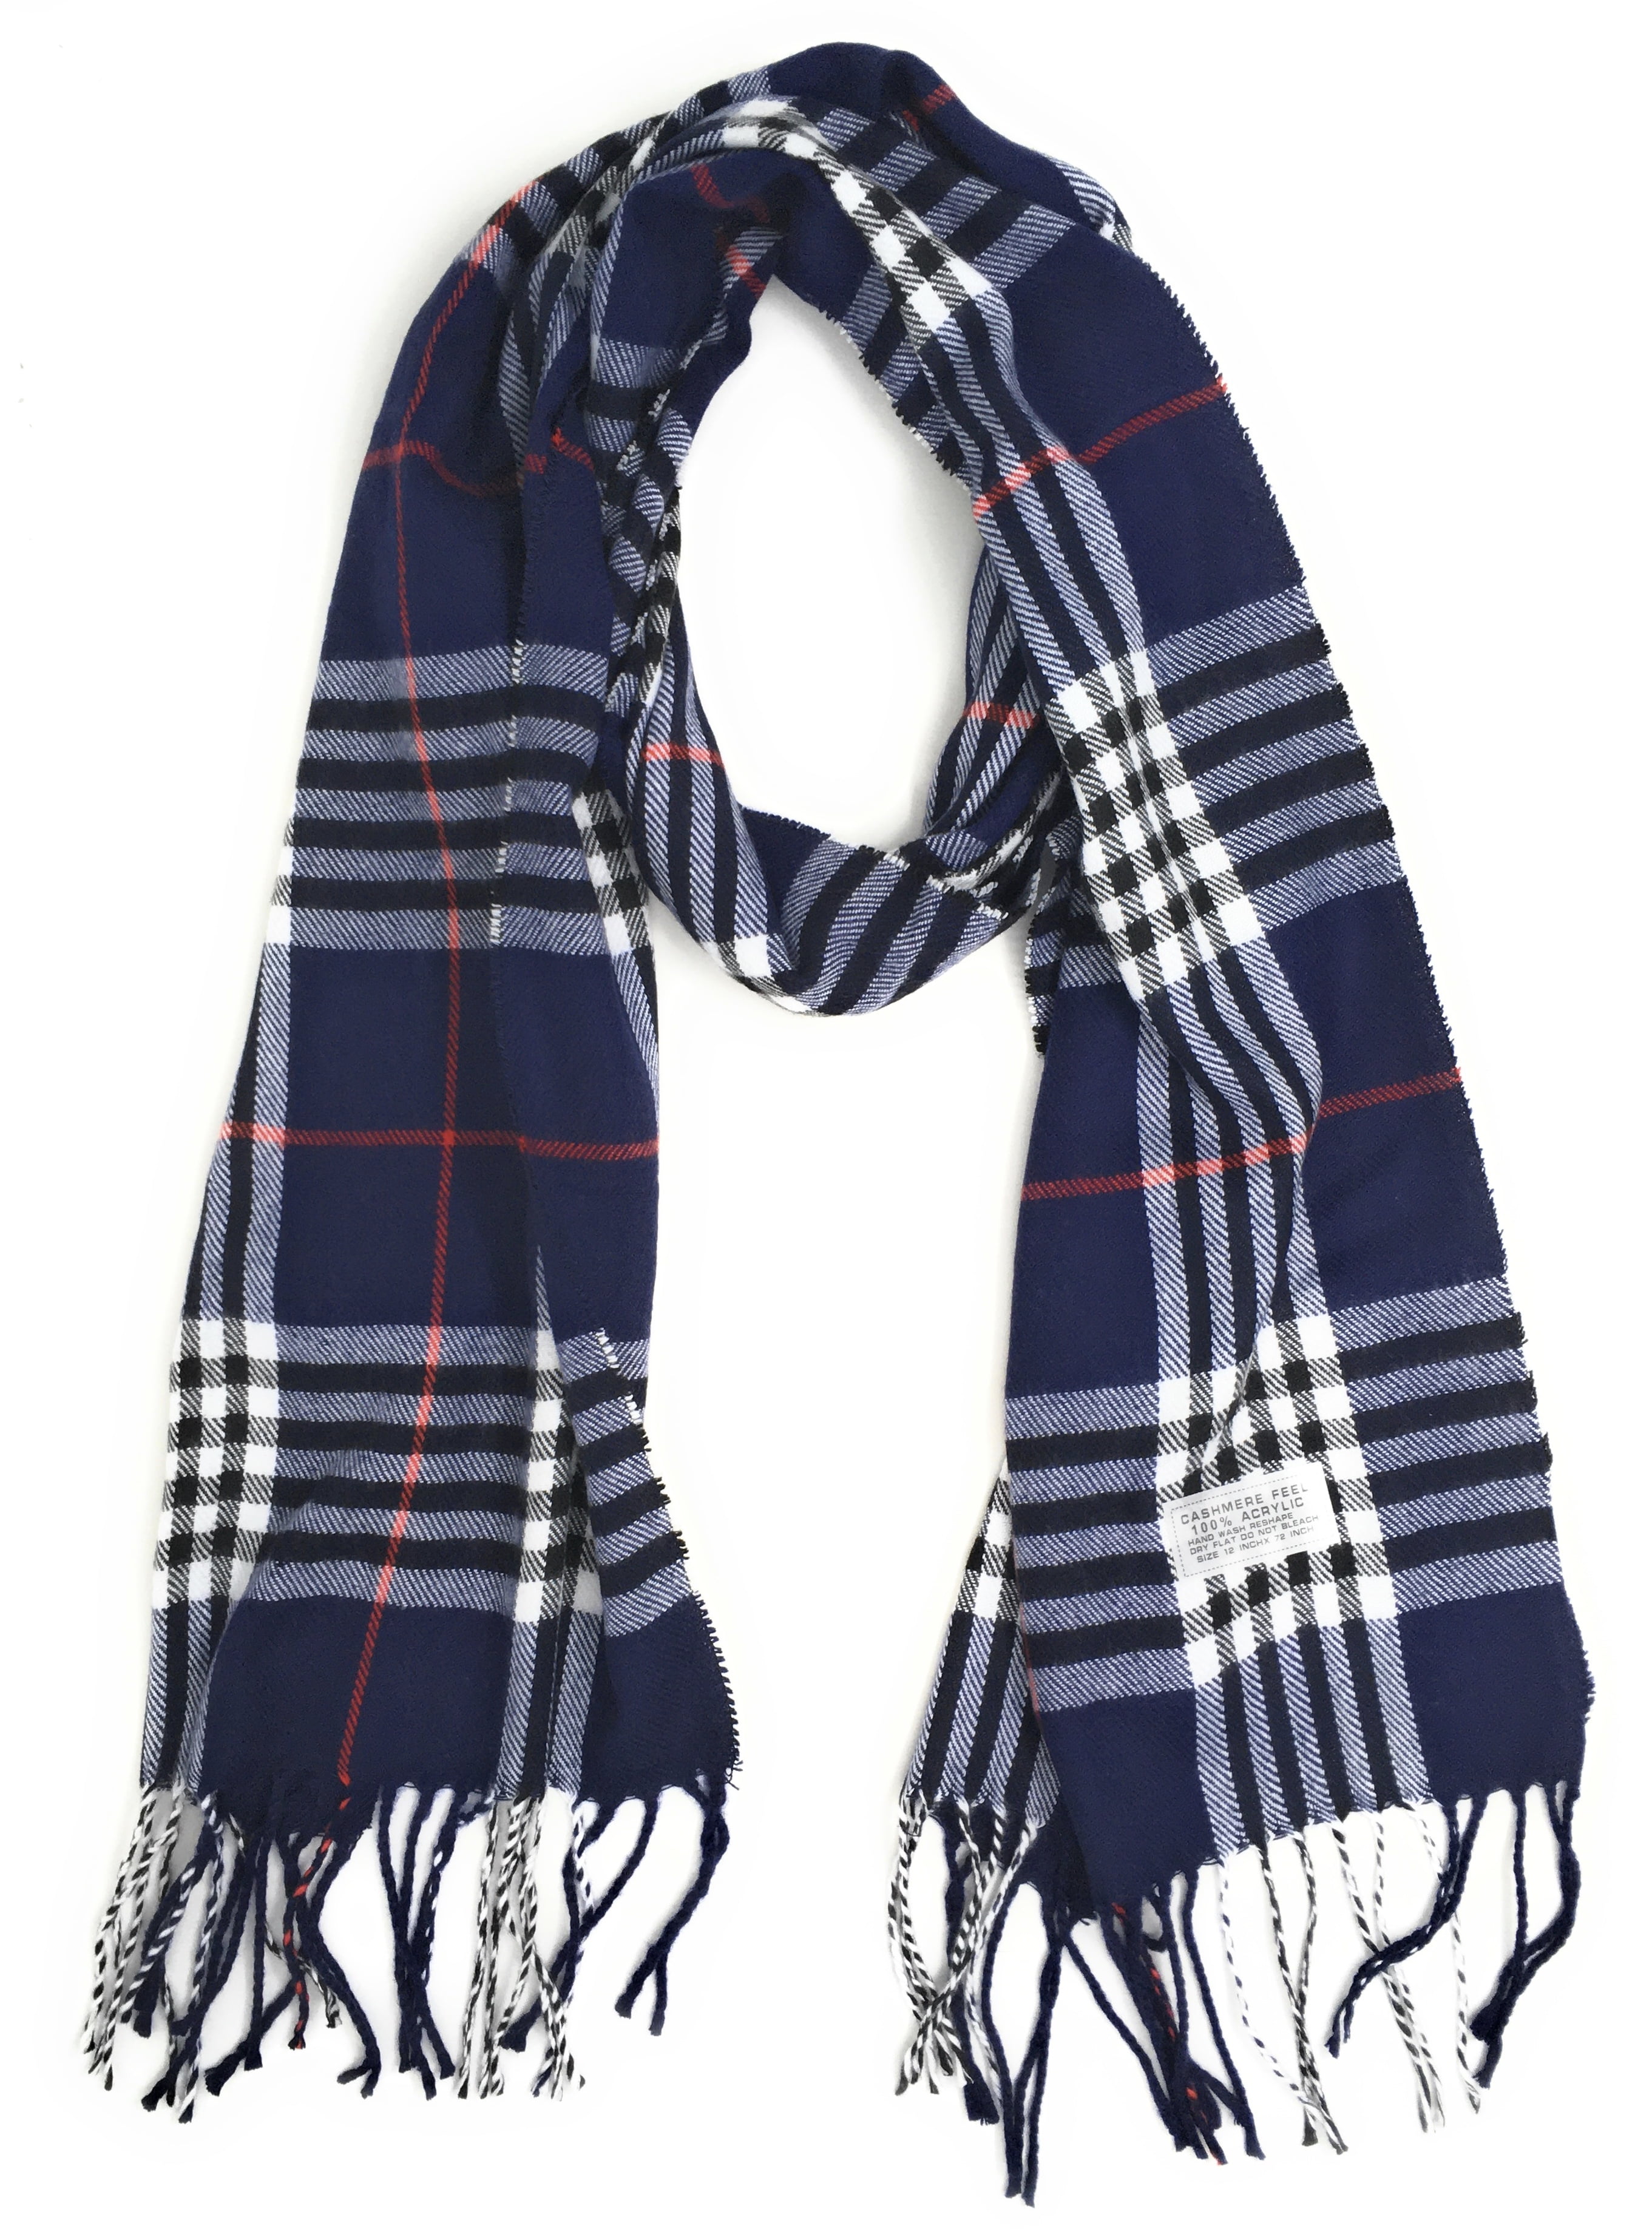 Winter scarf Unisex Vintage Scarf Navy Blue Red White Large cozy scarf Super Soft Plaid Scarf 19 x 72 inches Short fringe